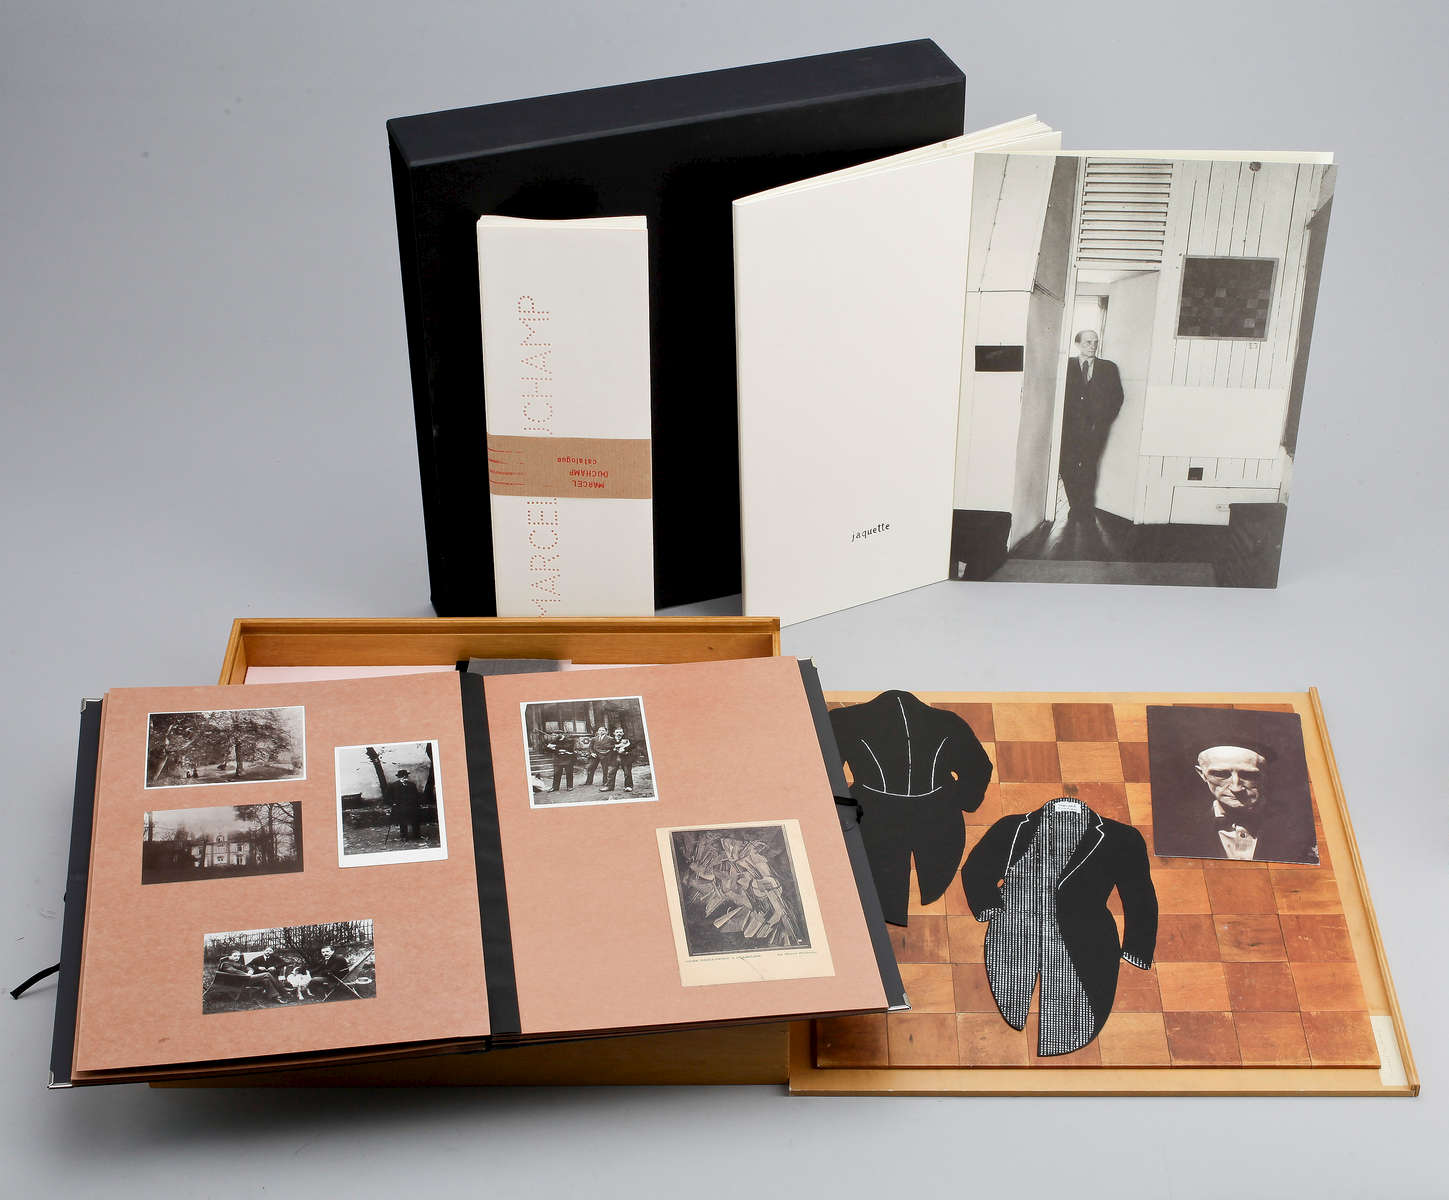 [Marcel Duchamp (1887 - 1968)]Wood box reproducing Marcel Duchamp's Mental Chess Board from 1937 and containing an exhibition catalogue (64 pp 13 3/8 x 4 1/4 in; 340 x 107 mm, complete with the price list); a portfolio containing reproductions and facsimiles of Marcel Duchamp's works, also including H. Vuibert, Les Anaglyphes Geometriques, Paris Librairie Vuibert, 112 (with 3D glasses); a book of articles on Duchamp by Andre Breton and Arturo Schwarz (inserted, on separate sheet, a reproduction of Le Grand Verre); an audiocassette of Duchamp speaking {quote}Priere d'ecouter{quote} with, on top of it, a miniature reproduction of Enrico Donati's breast from 1947; a single photograph of {quote}Marcel Duchamp at the Age of 85 for View; a colophon.14 1/2 x 14 1/4 x 2 1/4 in (37 x 36.5 x 6 cm)Numbered 417/850 on the inside coverEdited on the occasion of the exhibition {quote}Marcel Duchamp,{quote} Antwerp: Ronny Van de Velde, 1991Please click HERE for full fact sheet